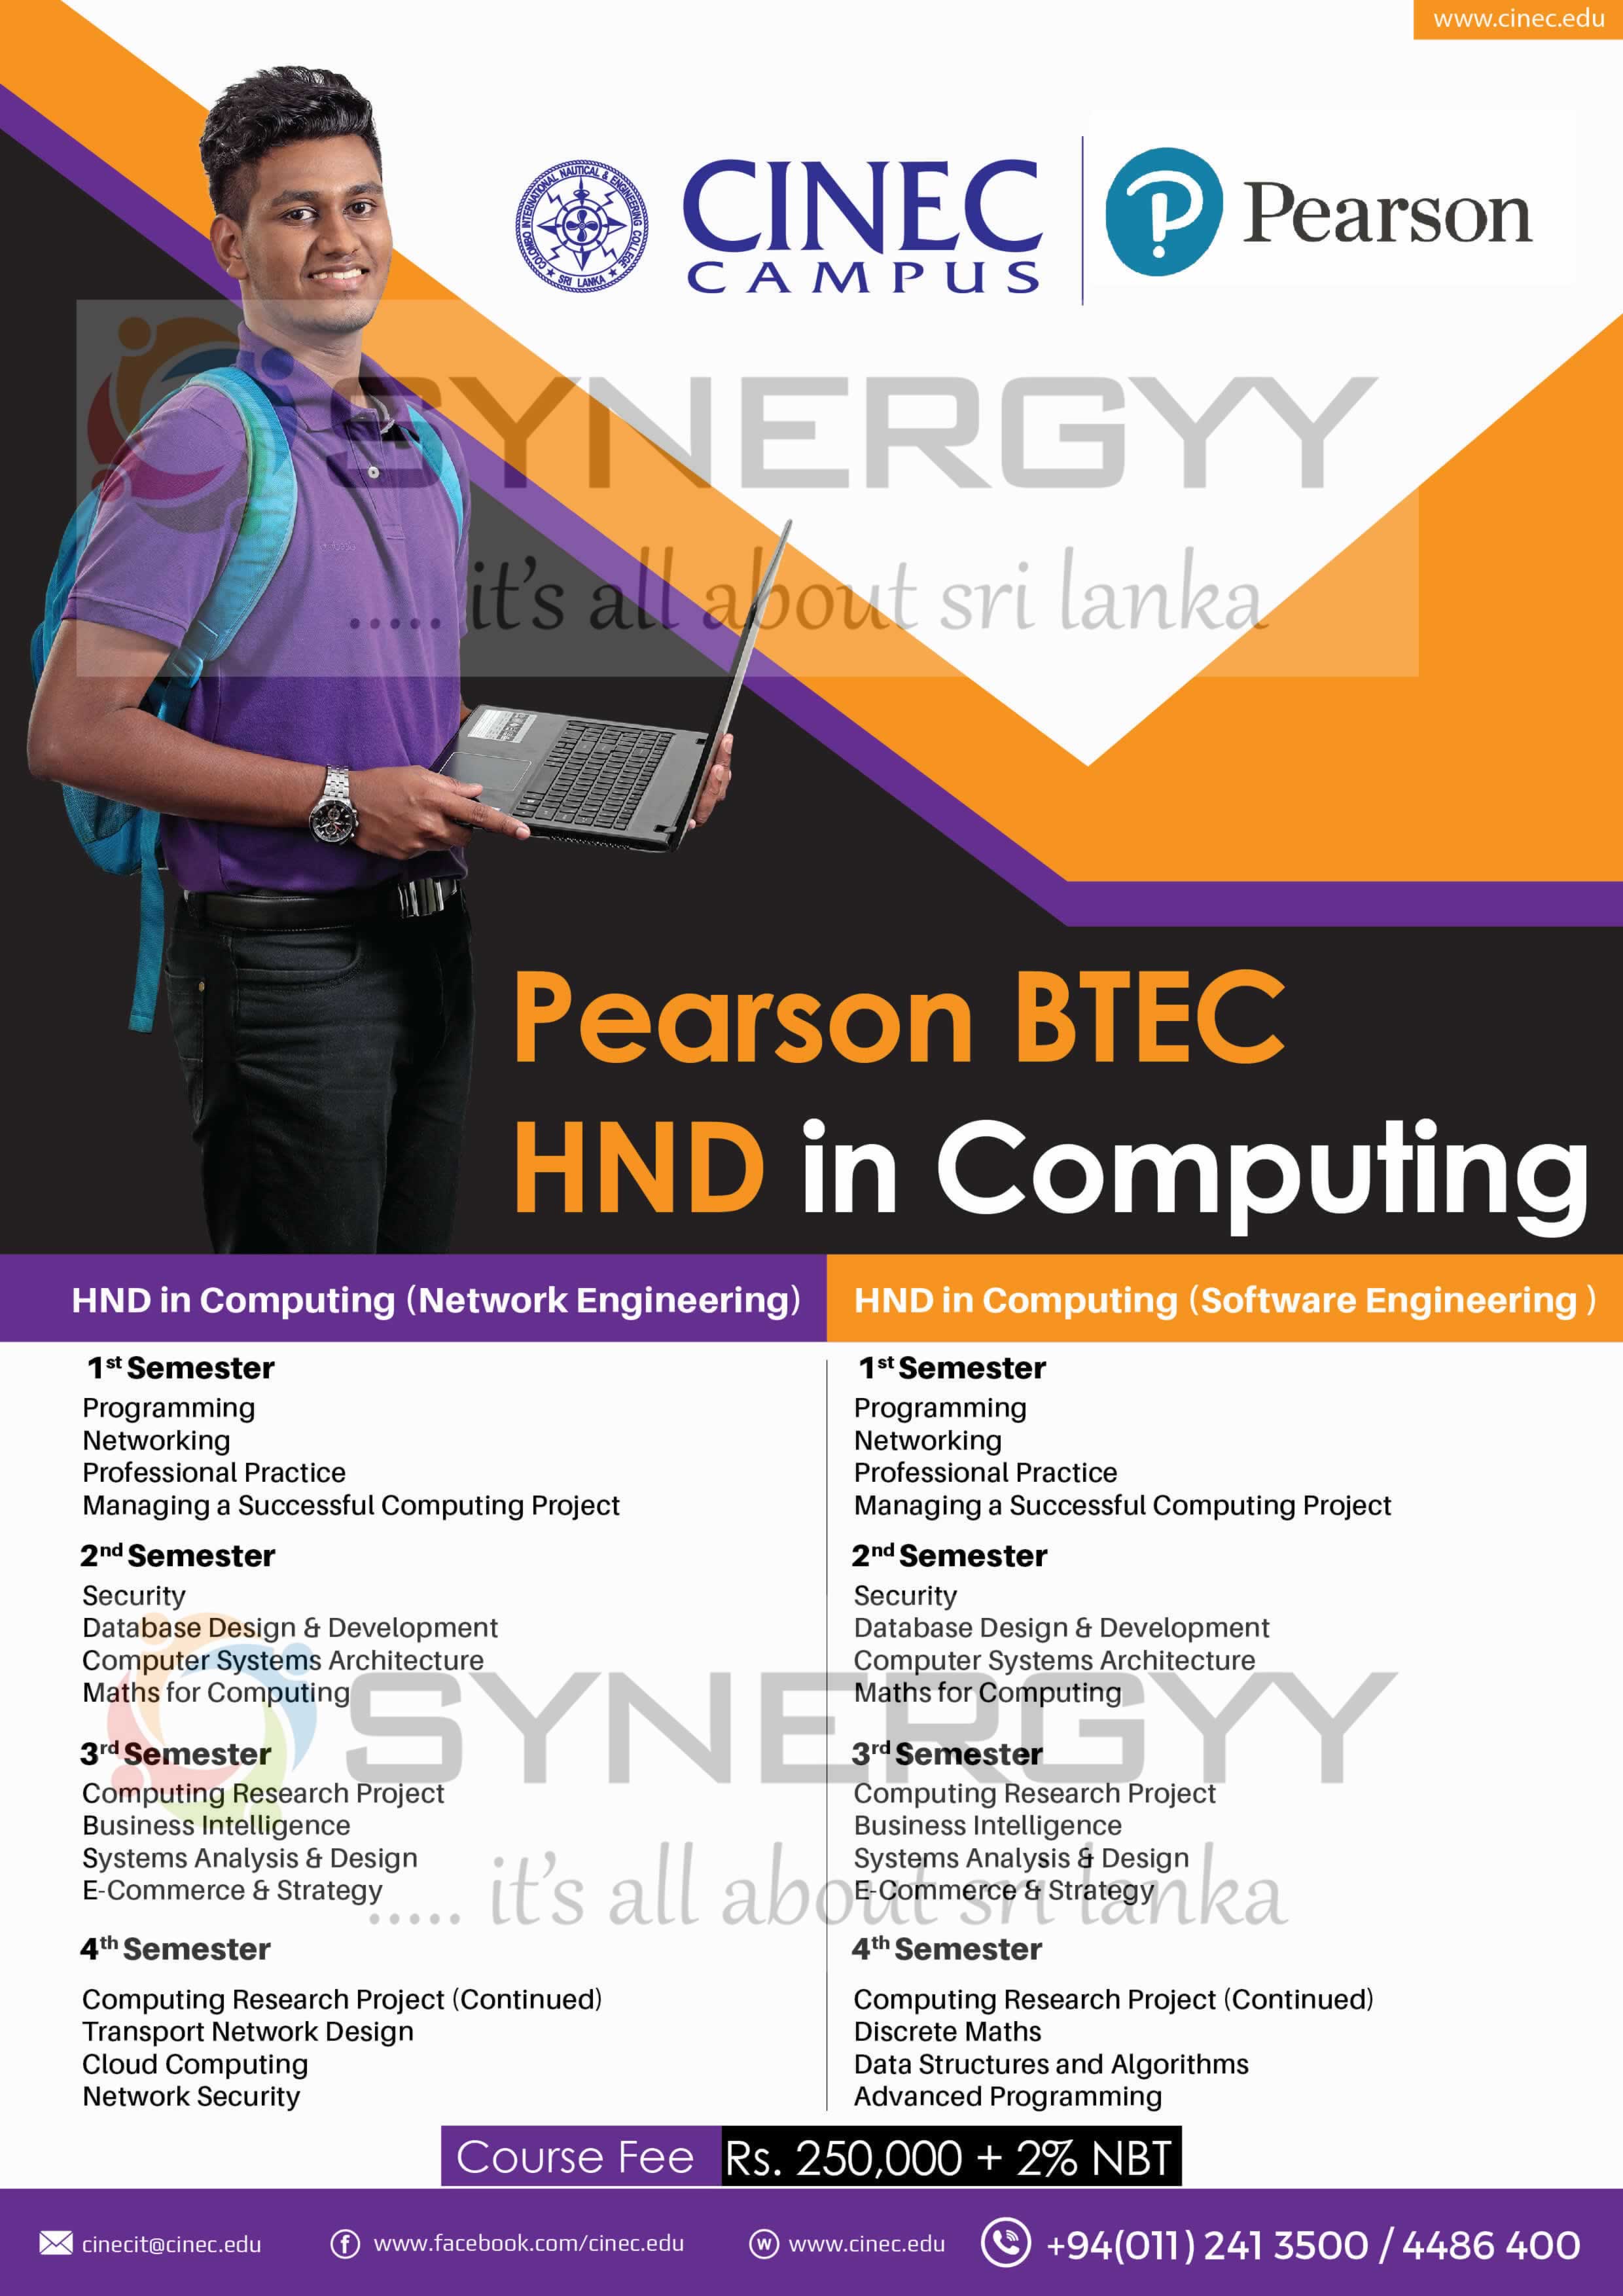 HND in Computing by Pearson CINEC Campus